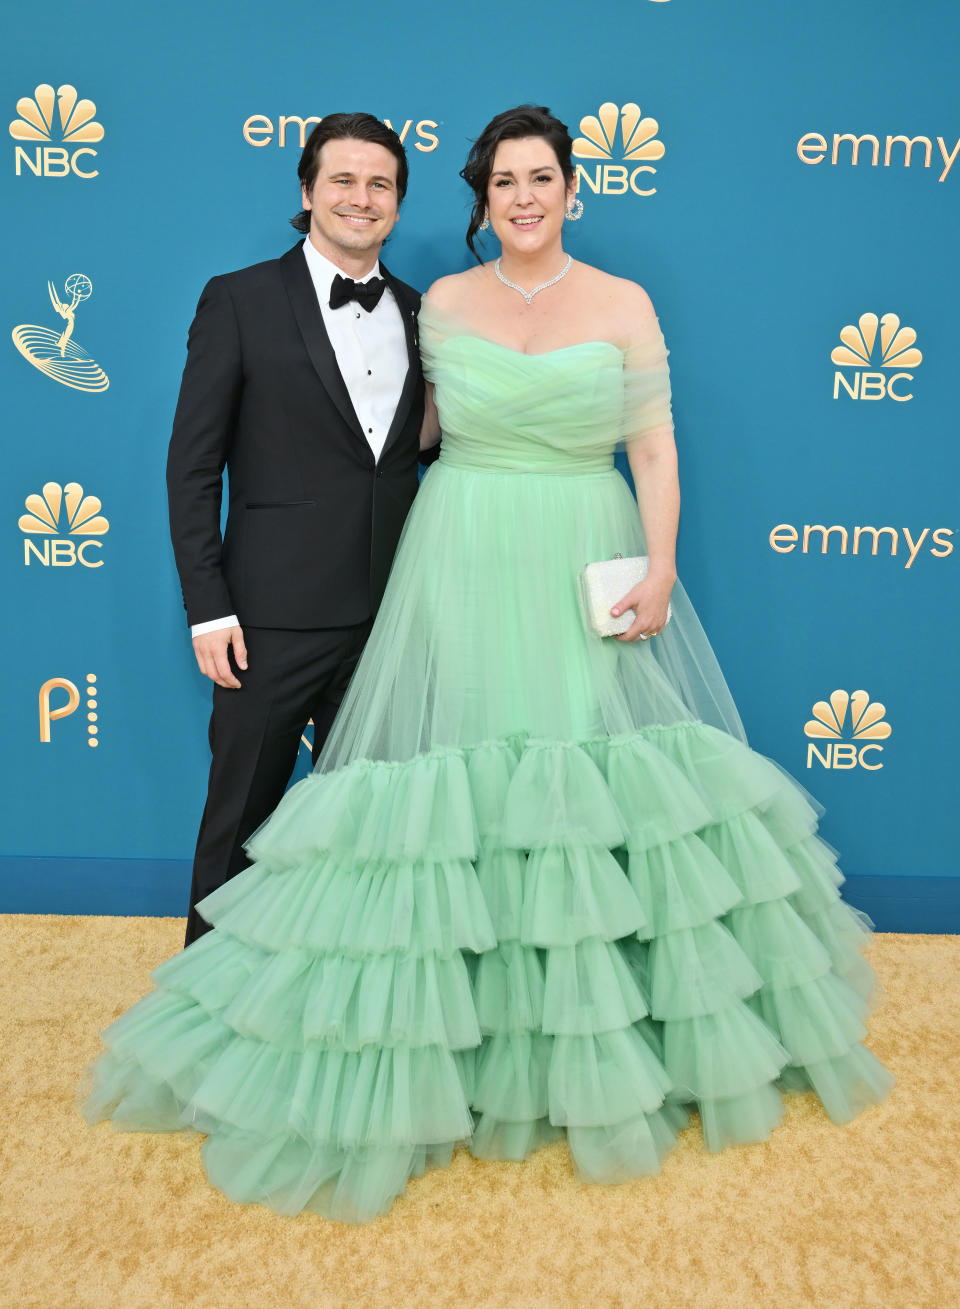 Jason Ritter and Melanie Lynskey at the 74th Primetime Emmy Awards held at Microsoft Theater on September 12, 2022 in Los Angeles, California. (Photo by Michael Buckner/Variety via Getty Images)